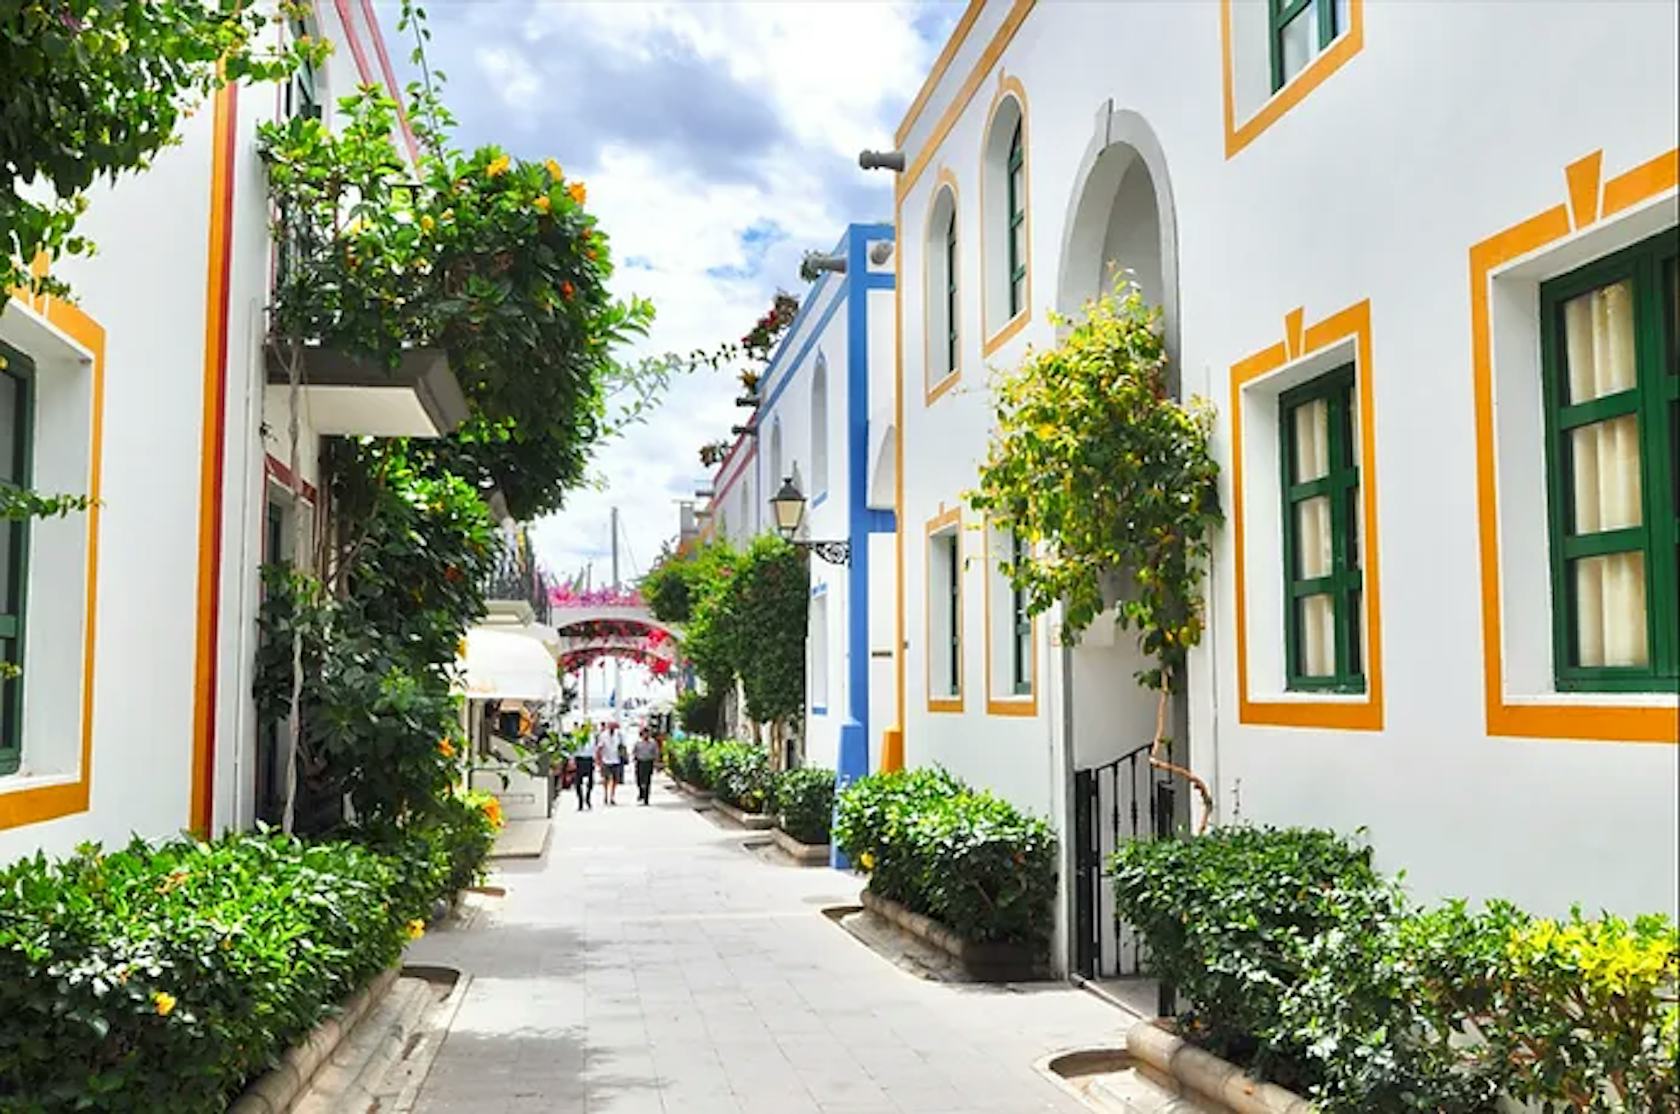 Discovering Marbella: The best spots for luxury shopping